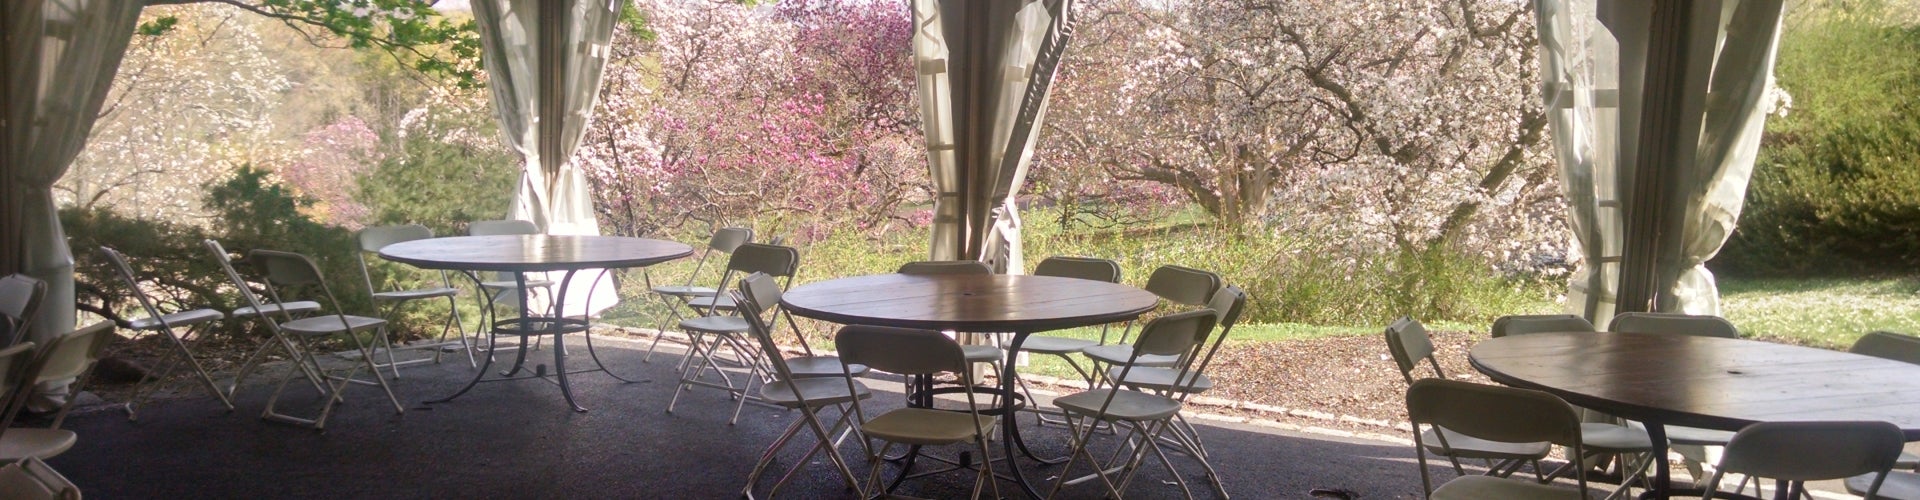 Empty round tables underneath a tent backdropped by flowering pimk and white spring trees.